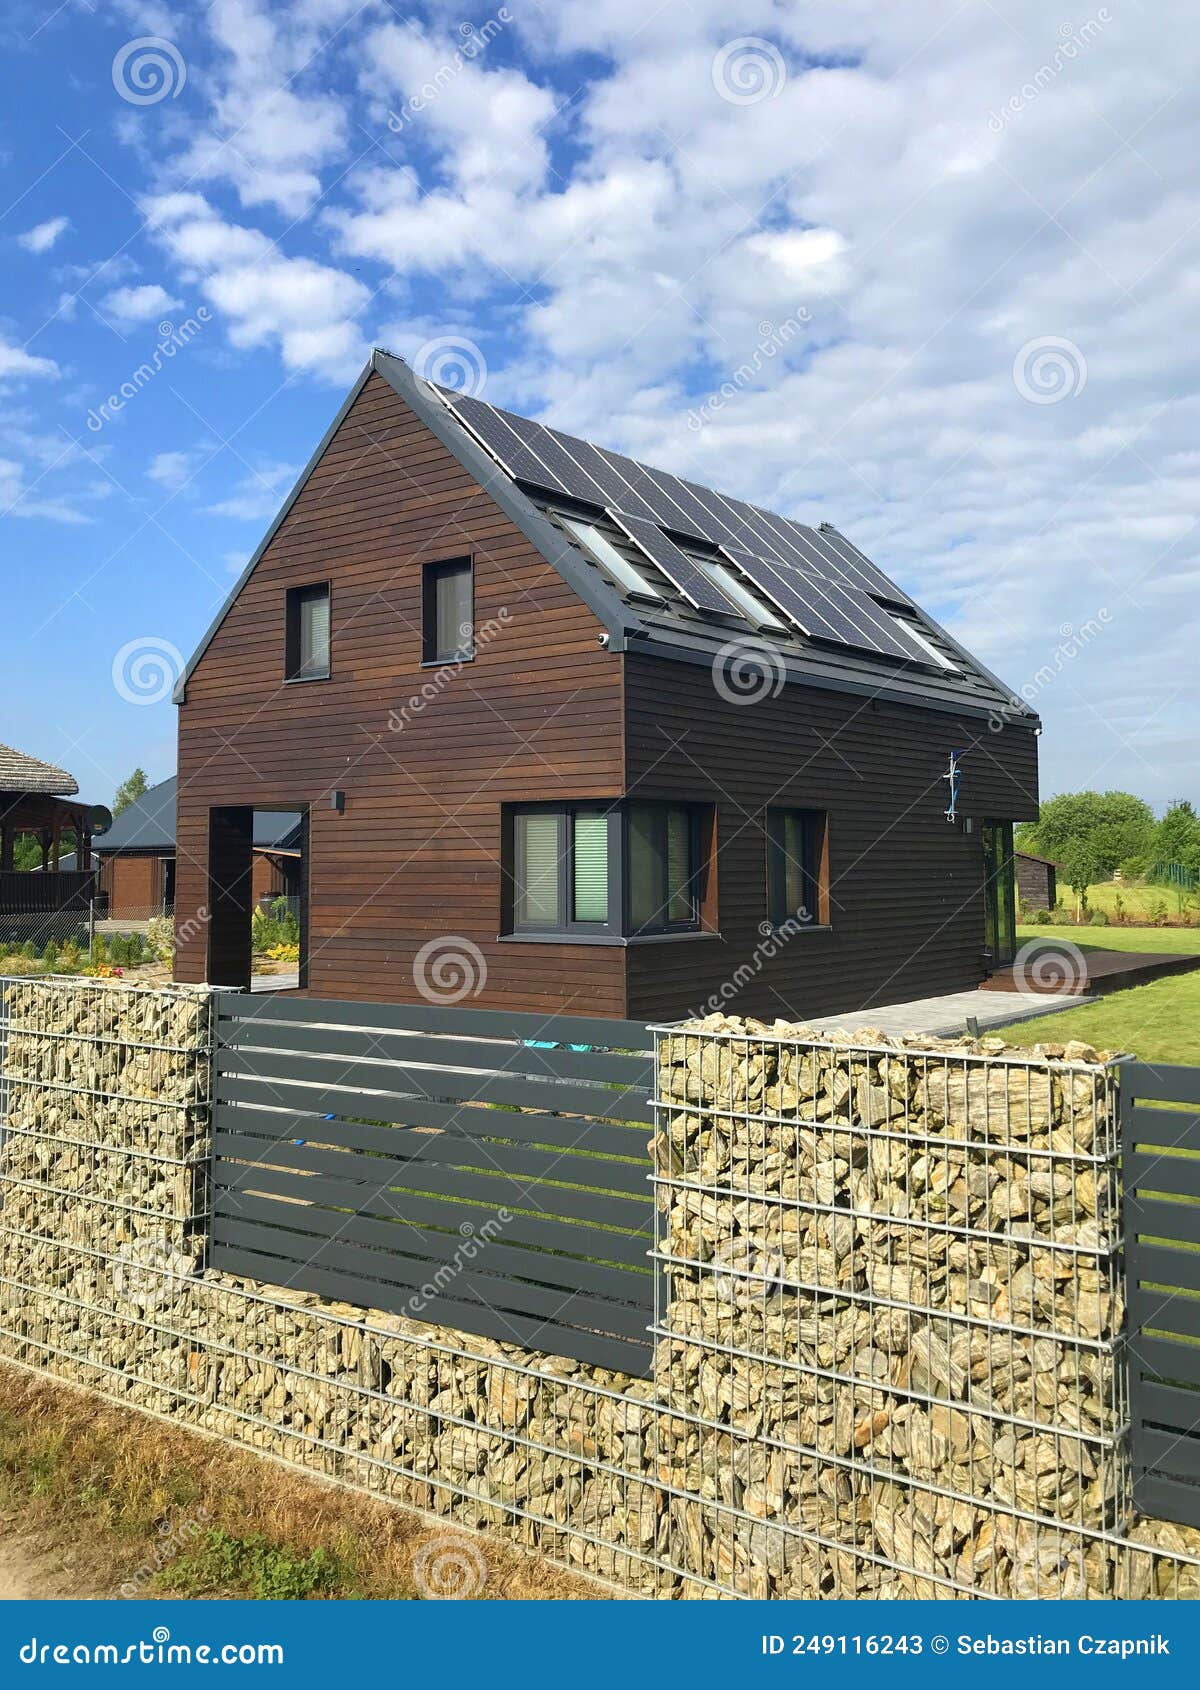 modern energy efficient house with solar panels and gabion fence